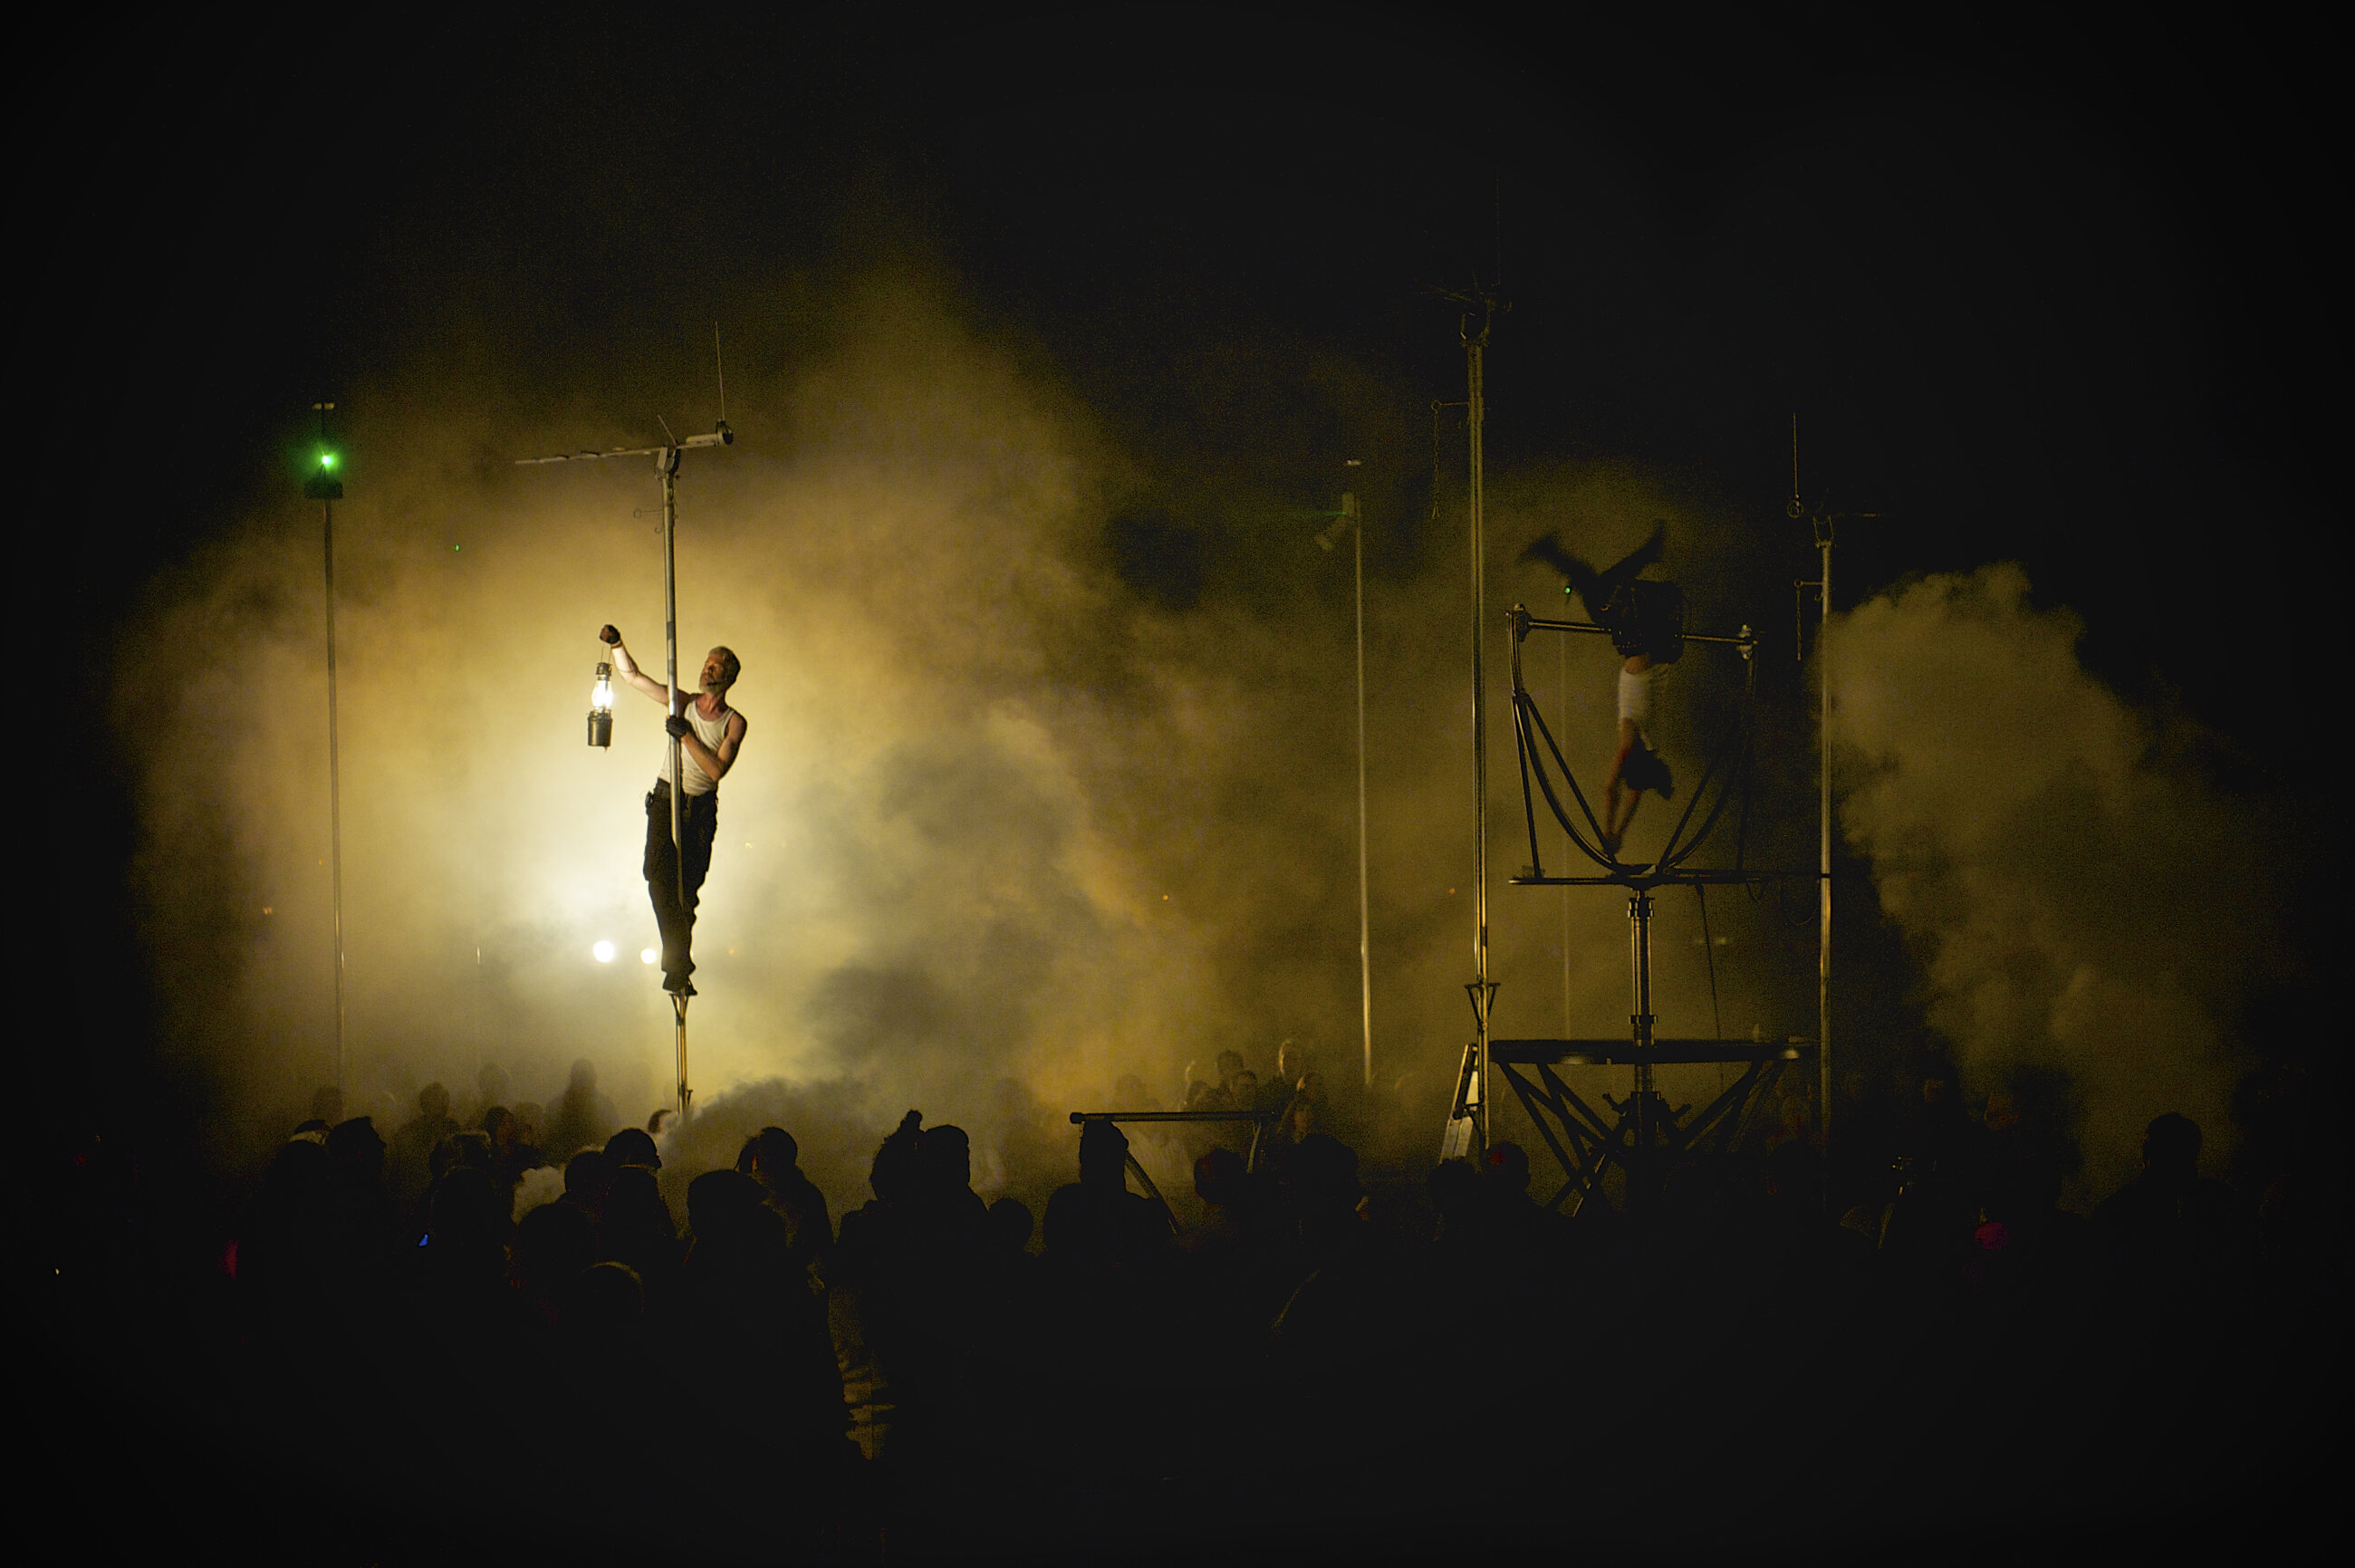 This image is of 2 artists performing at an outdoor show with an audience. One of the artists is standing on a metal pole, holding a lamp lantern to the left.  The other artist to the right of the image is caught mid somersault with both legs in the air while they perform on a different metal structure. The image is taken at night and the sky is lit up with an orange ambient smoke/mist.